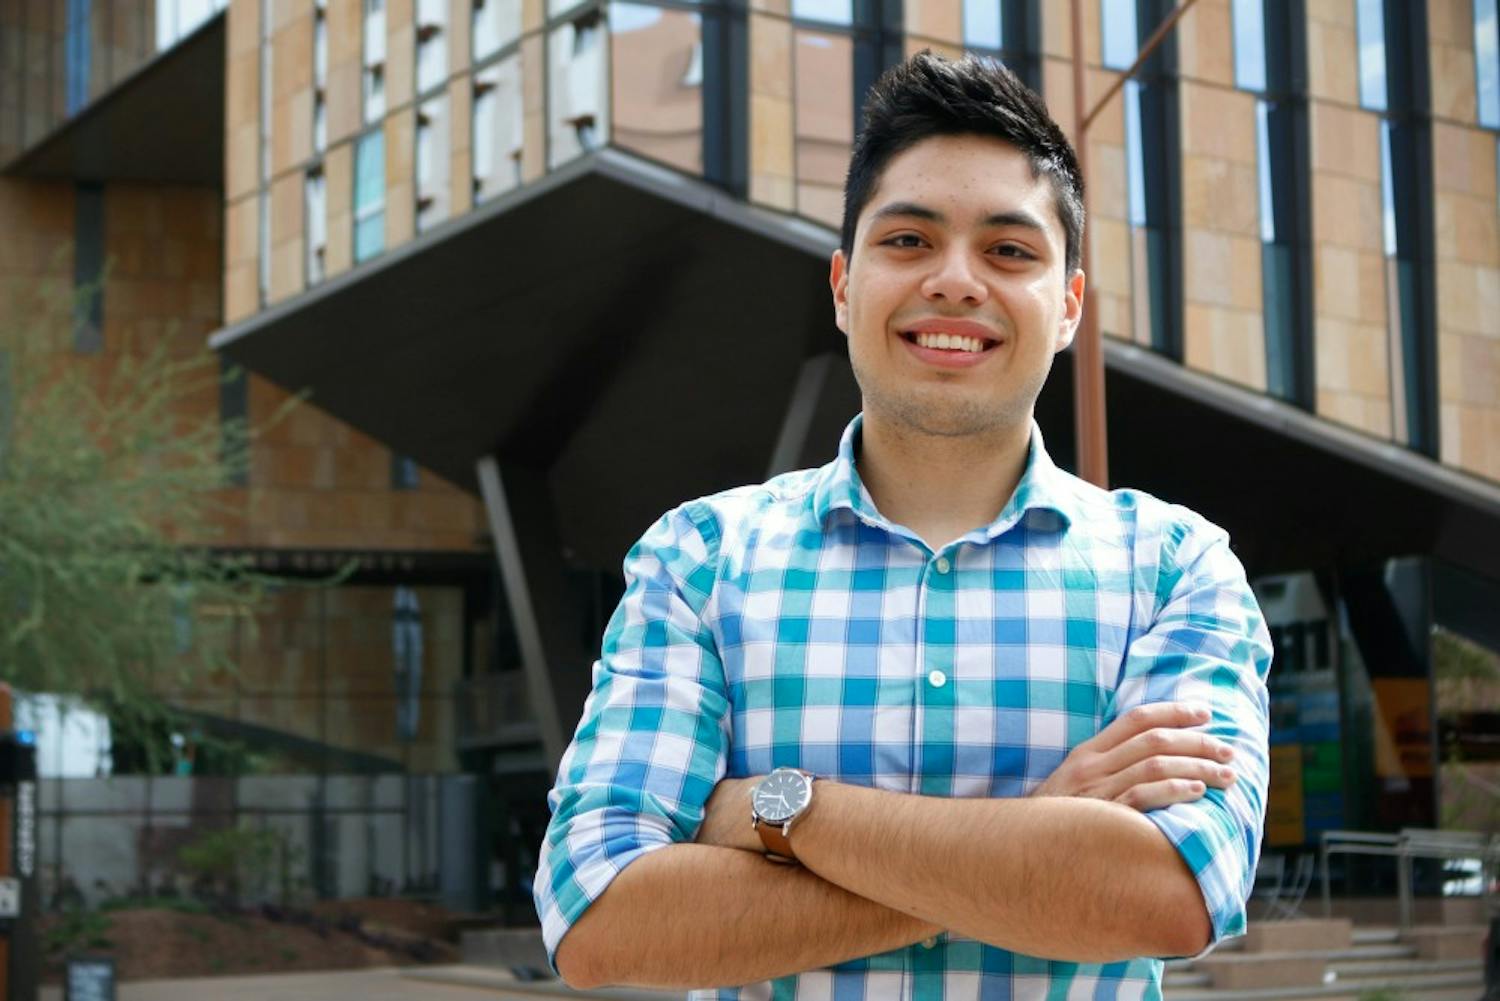 ASU junior public policy student and DACA recipient Oscar Hernandez poses for a portrait in downtown Phoenix on Friday, Feb. 17, 2017